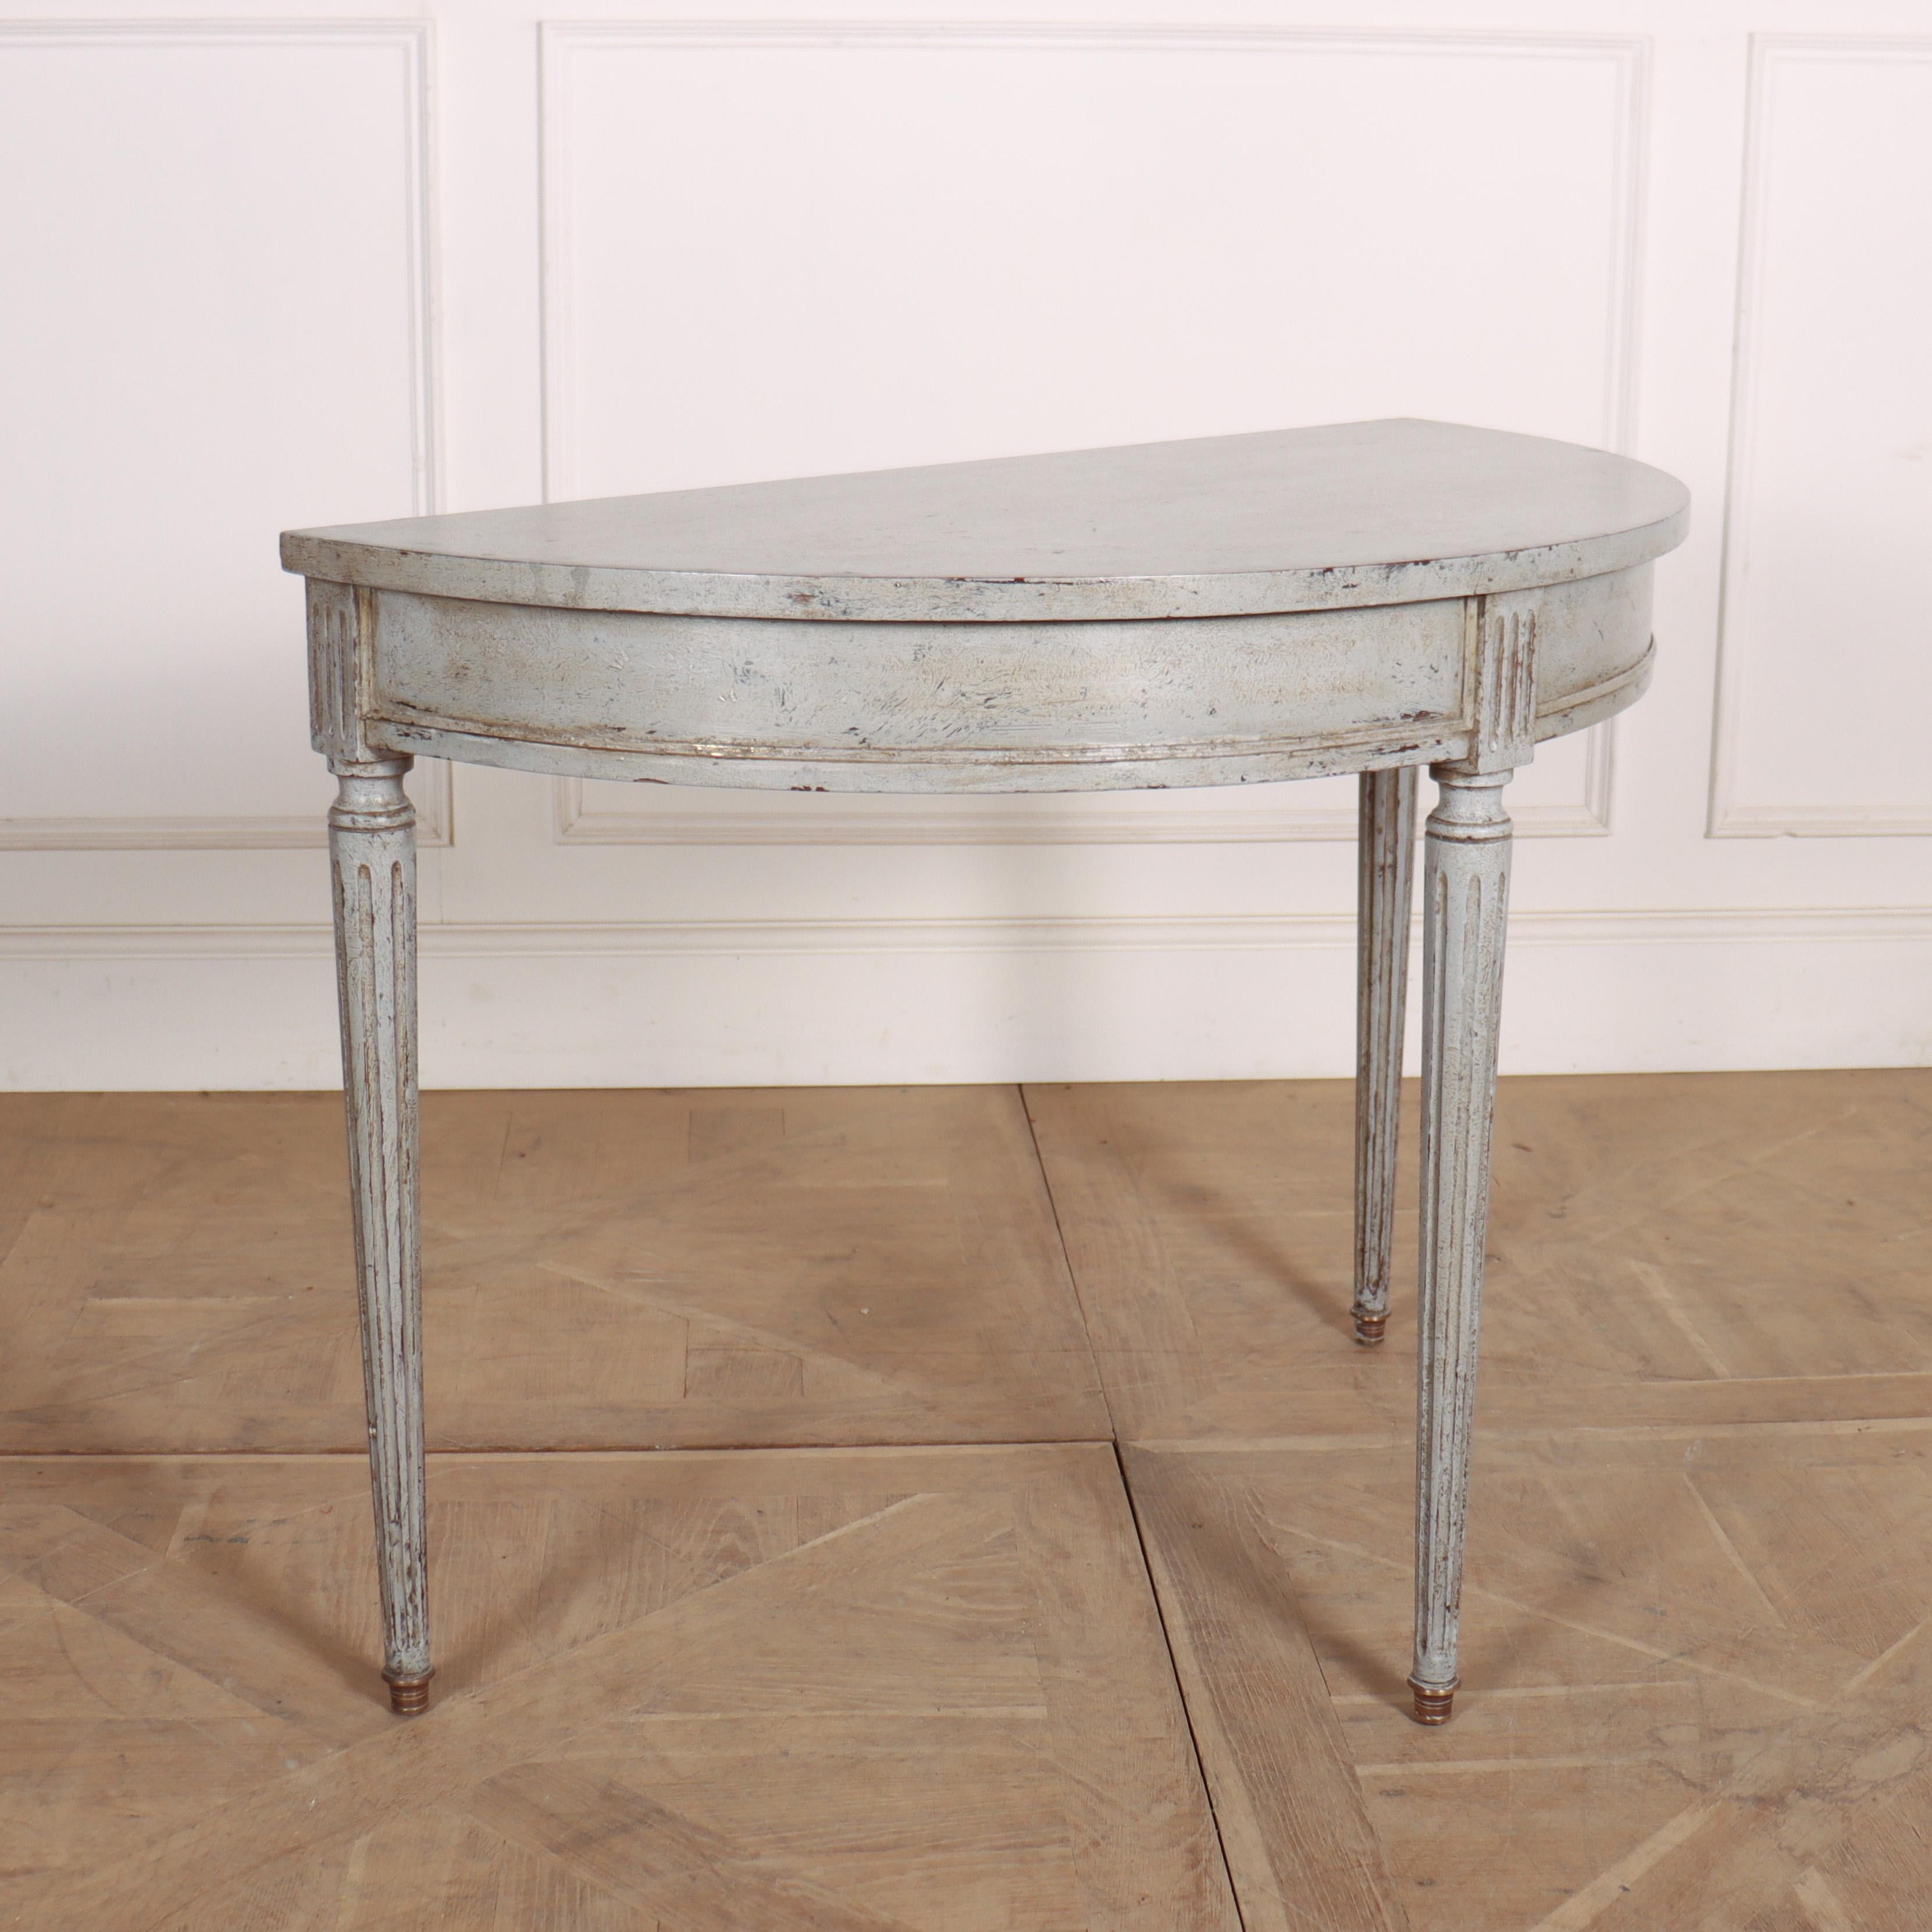 20th Century English Painted Console Table